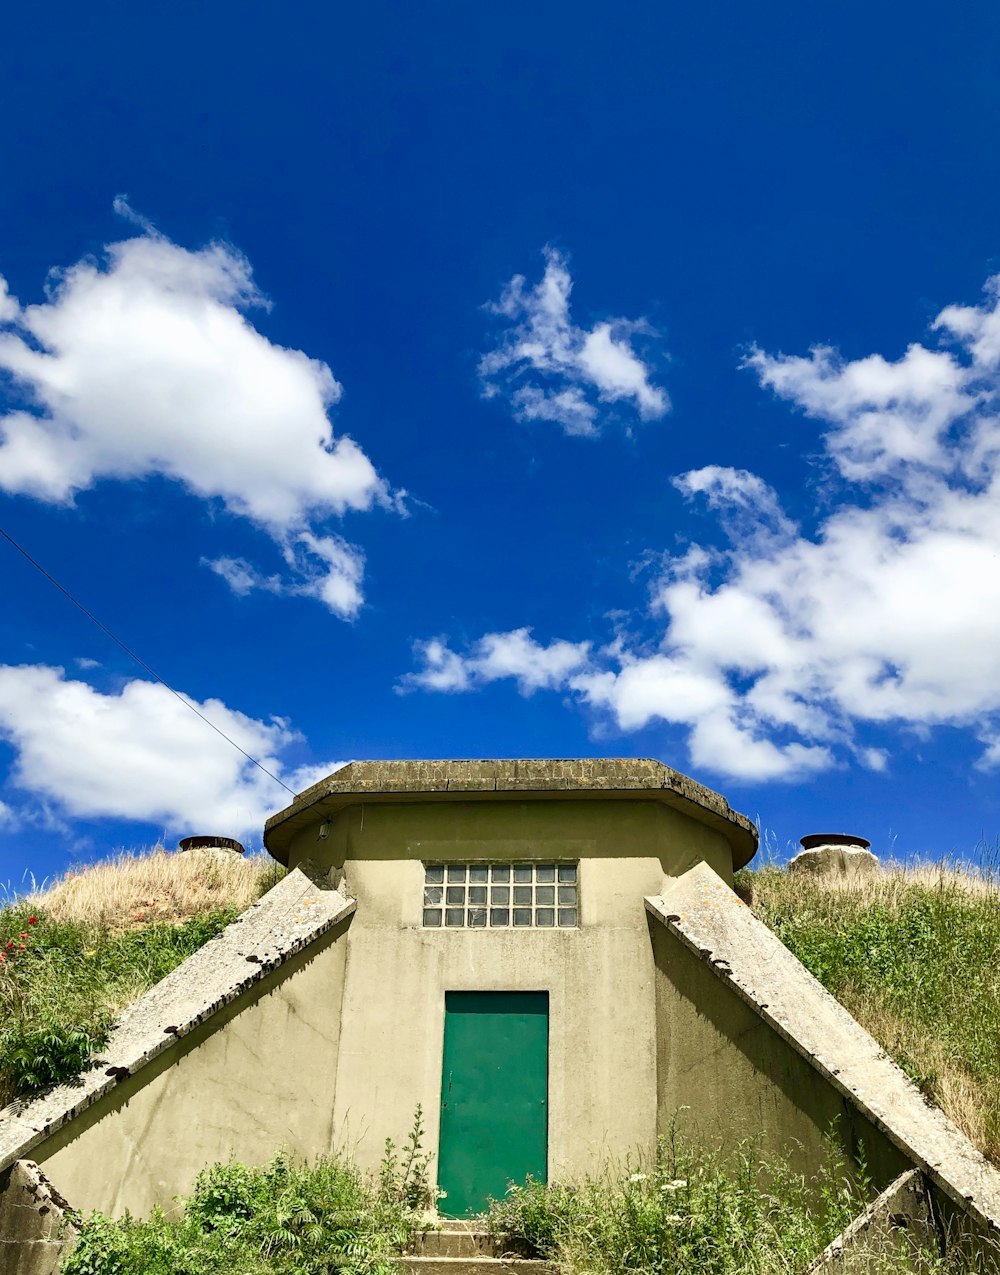 a building with a green door on a hill